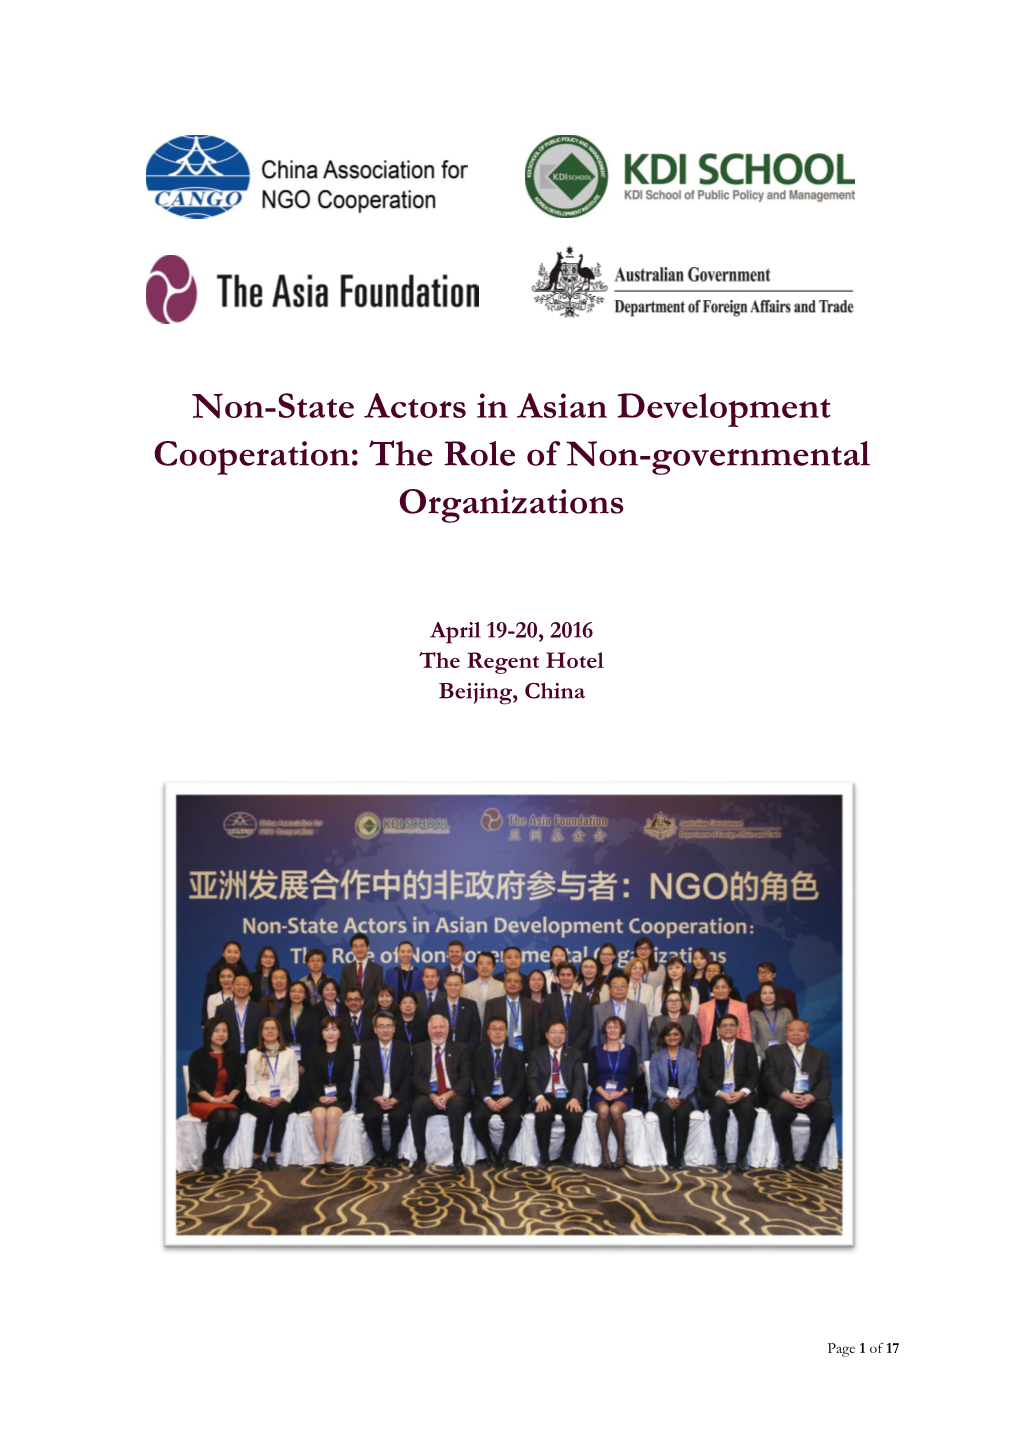 Non-State Actors in Asian Development Cooperation: the Role of Non-Governmental Organizations